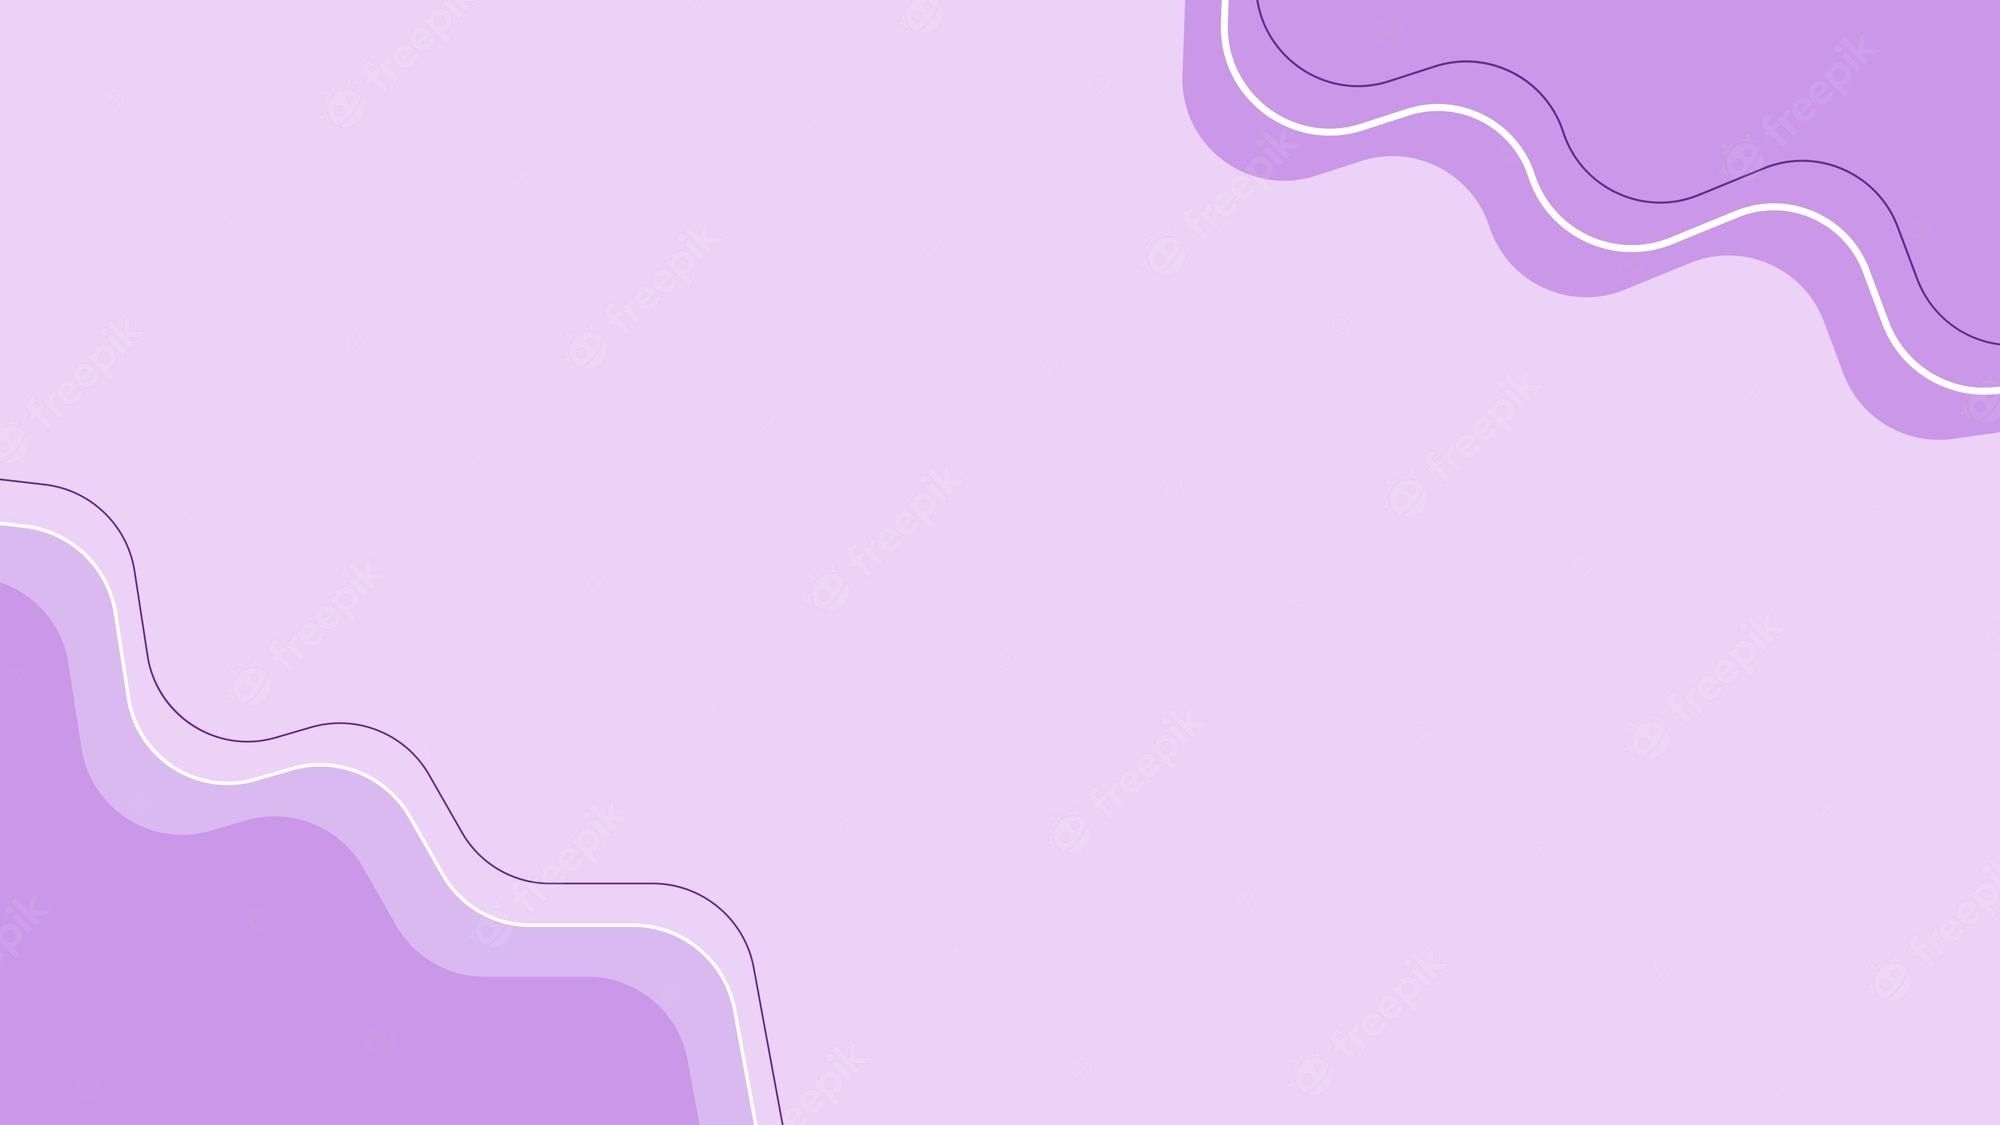 A purple abstract background with a white wavy line on the left side and a thick white wavy line on the right side. - Purple